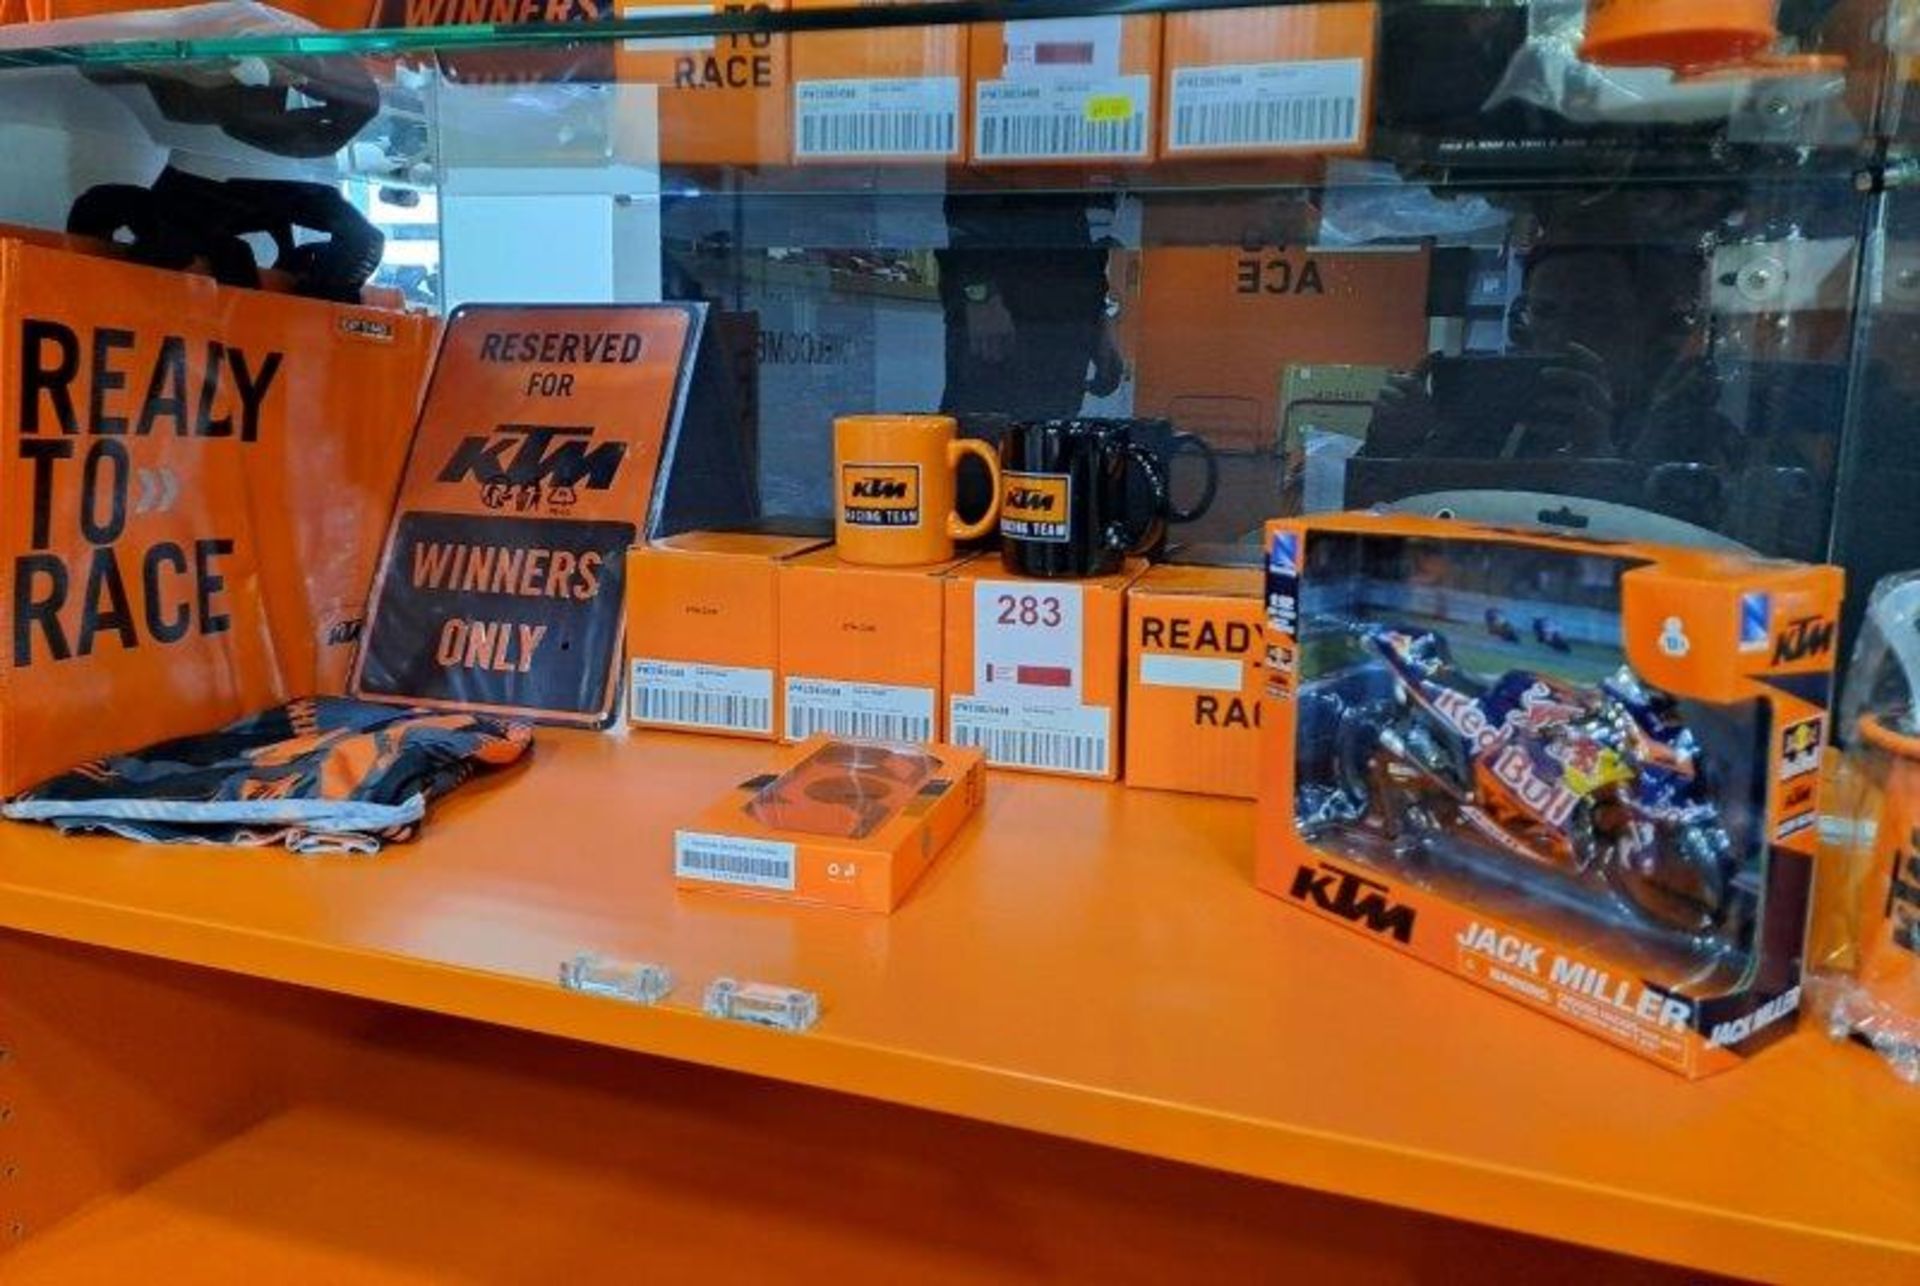 Contents of shelf of KTM Merchandise as pictured